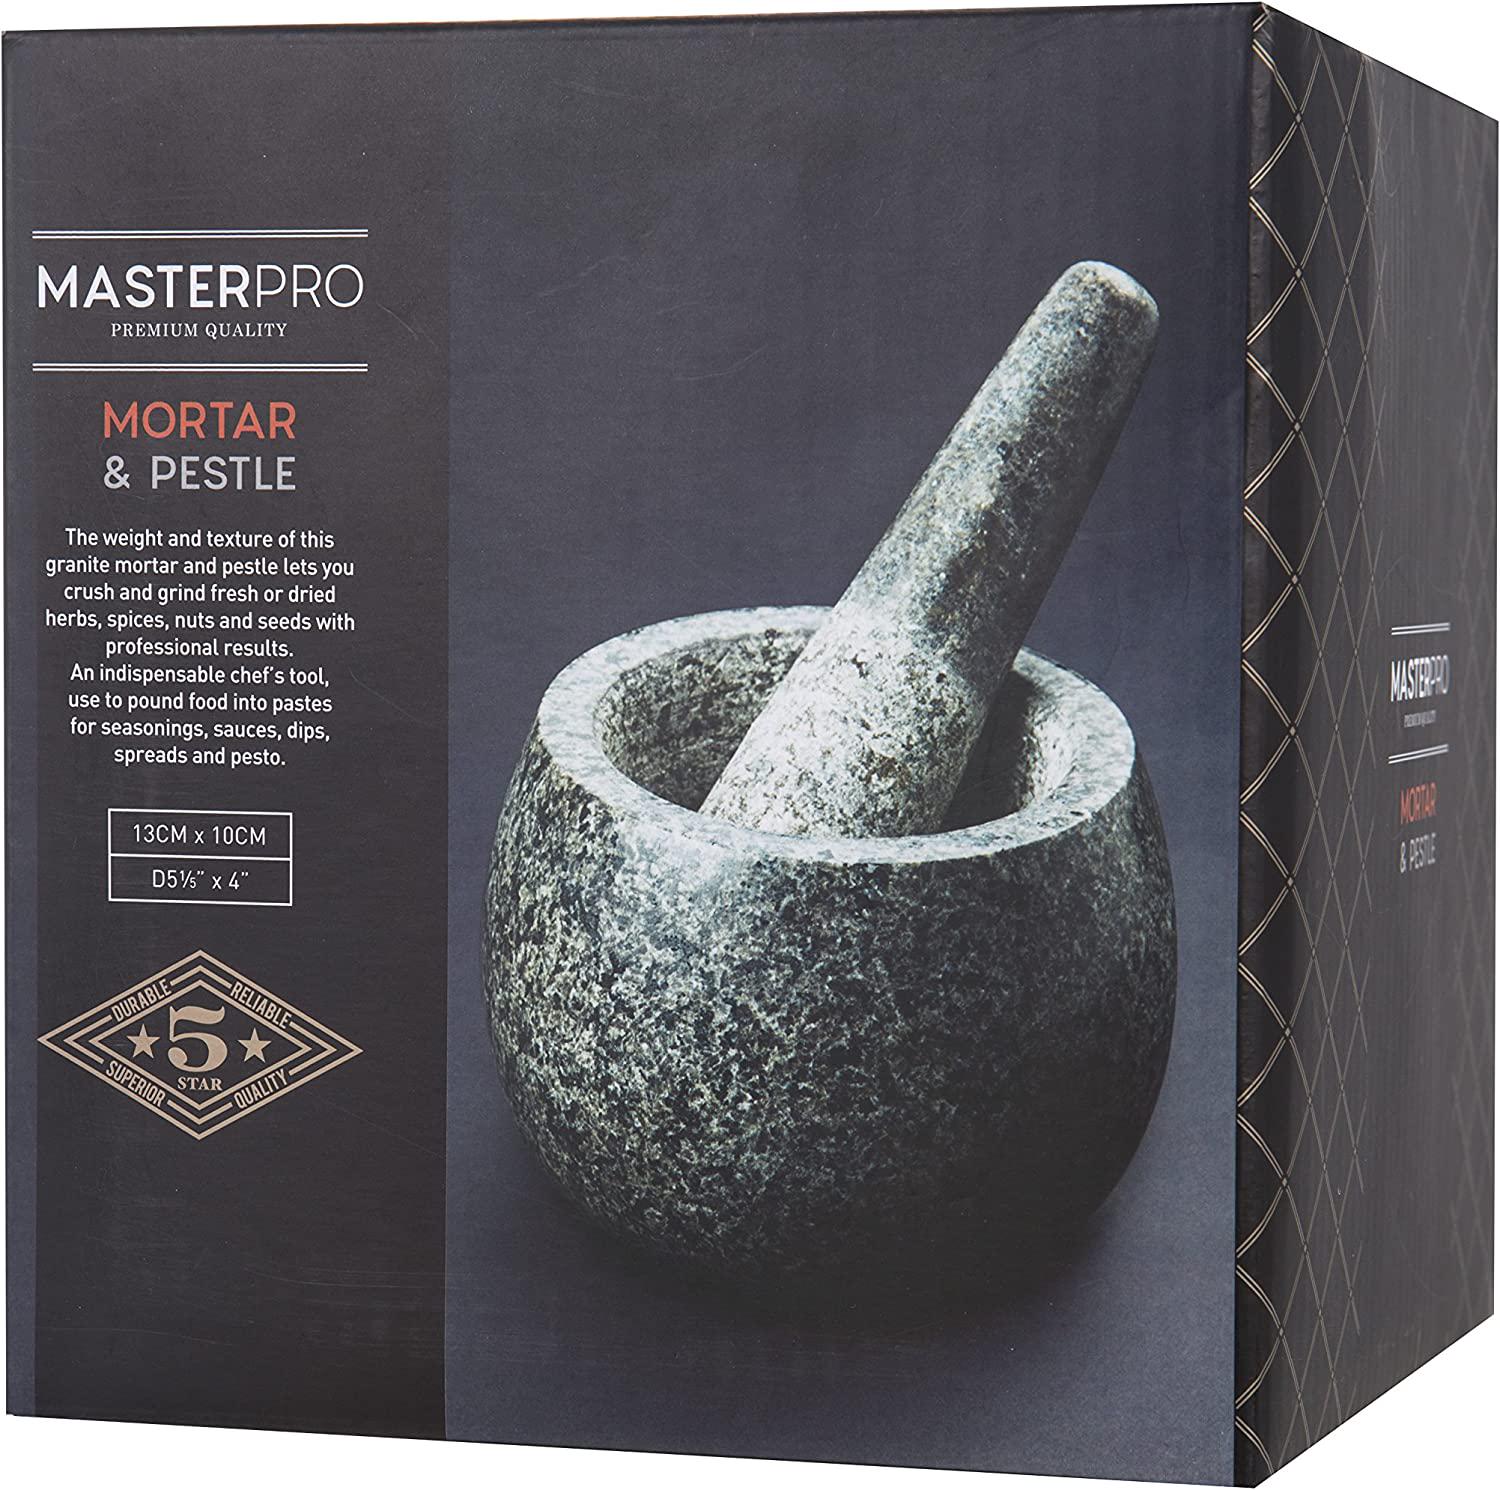 MasterPro, MasterPro Traditional Granite Mortar and Pestle| Crush and Grind Herbs, Spices, Salt, Nuts and Seeds| Black/White Speckle